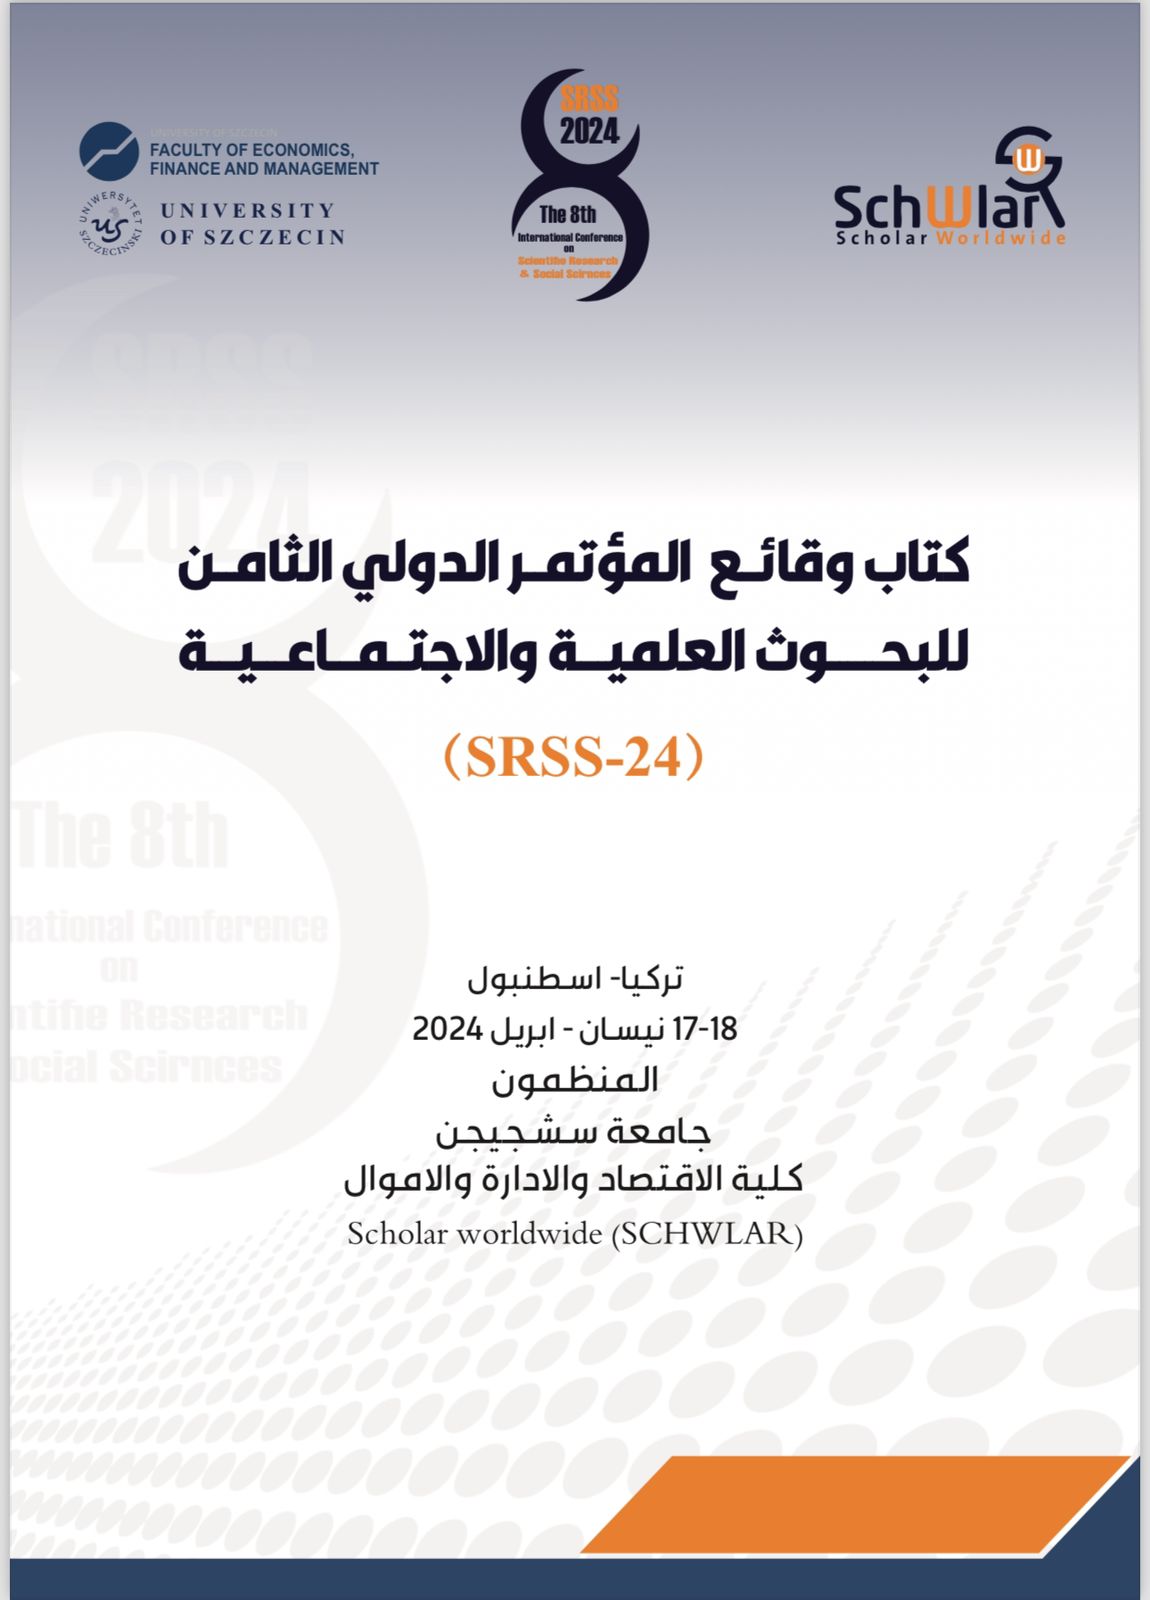 Publication of the Proceedings book of The 8th International Conference on Scientific Research and Social Sciences (SRSS-24)